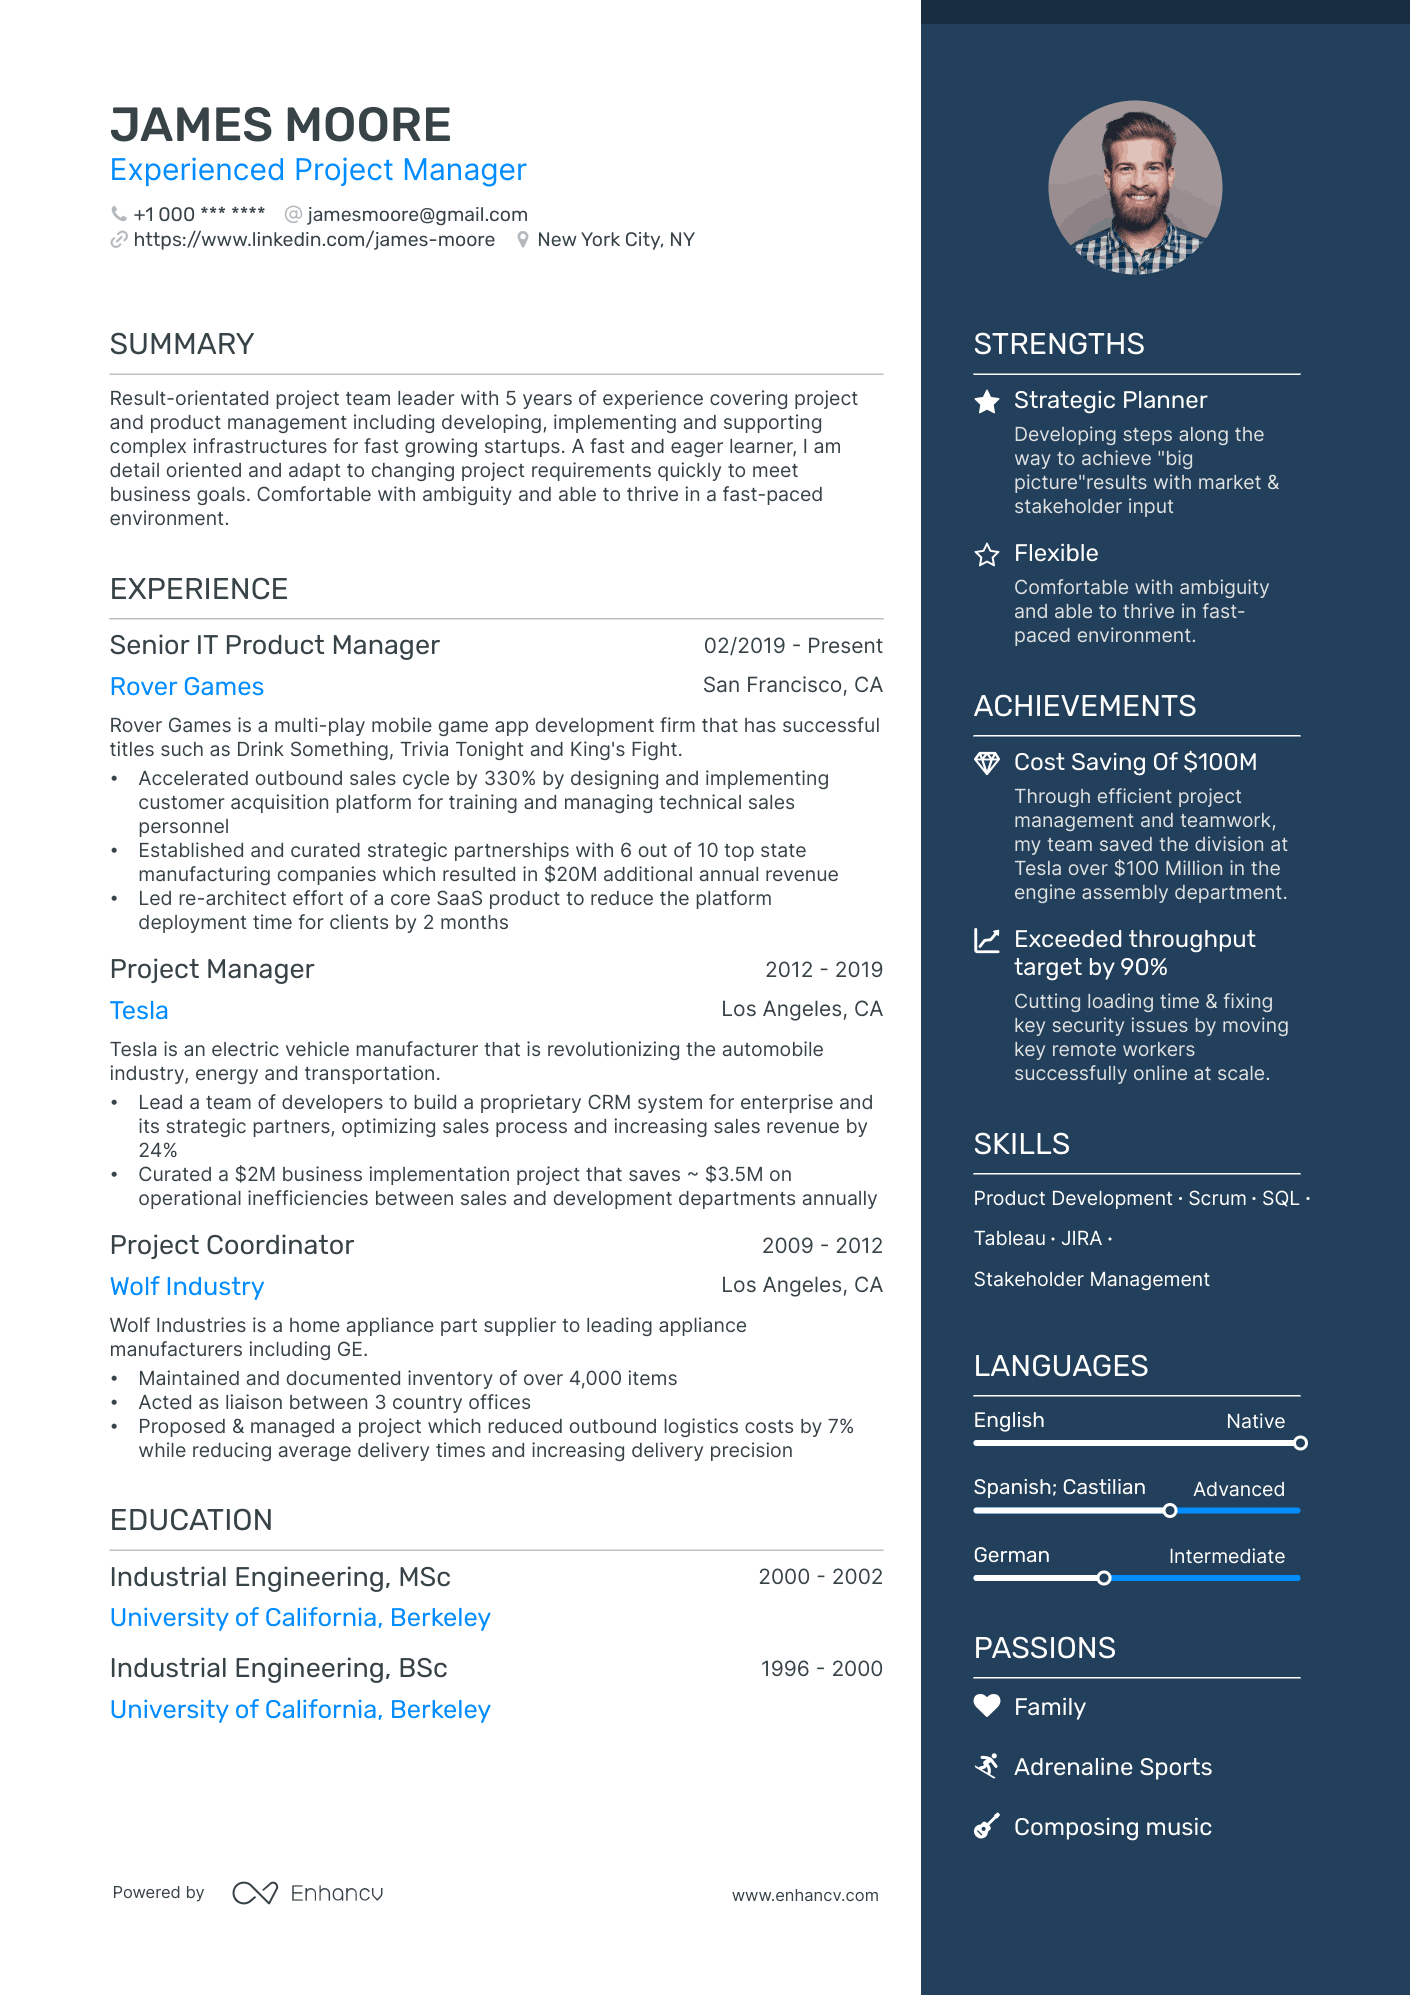 Experienced Project Manager CV example